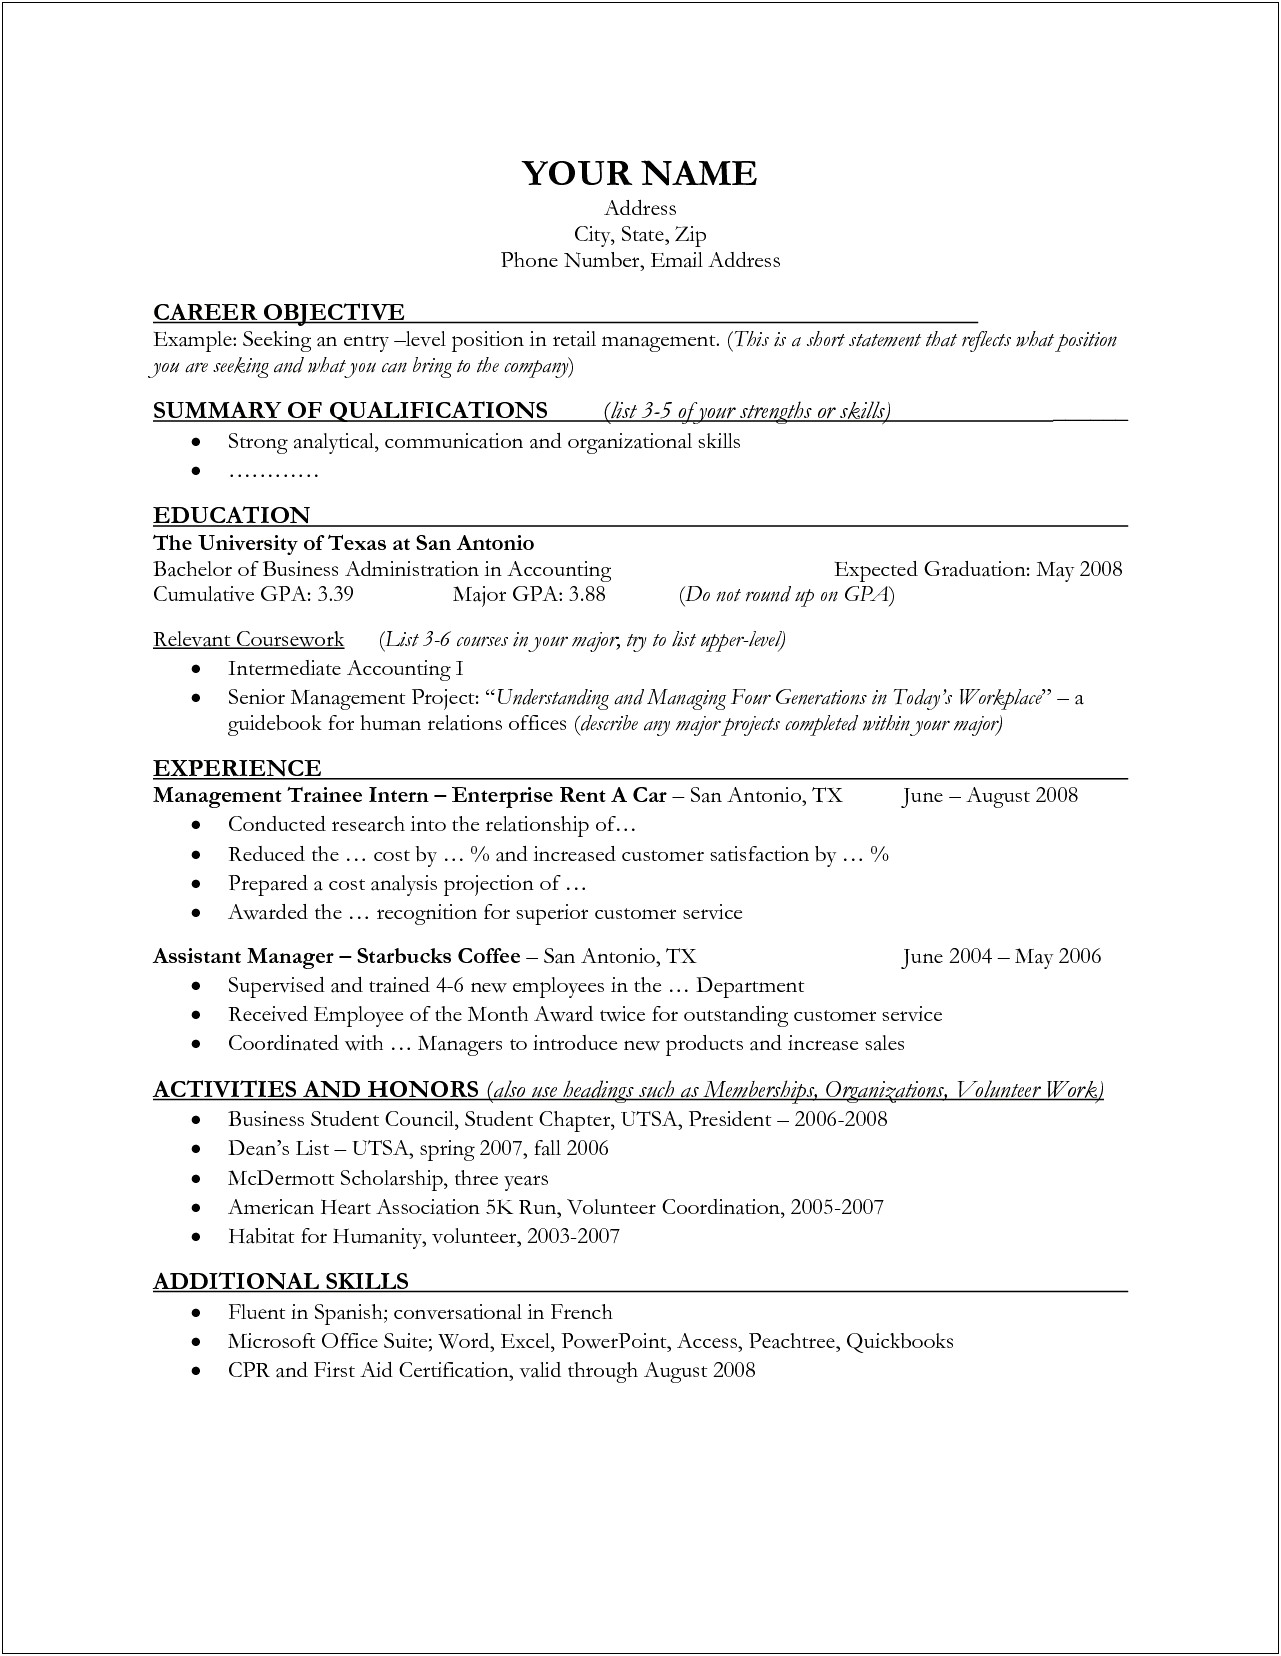 Banking Manager Resume Objective Examples